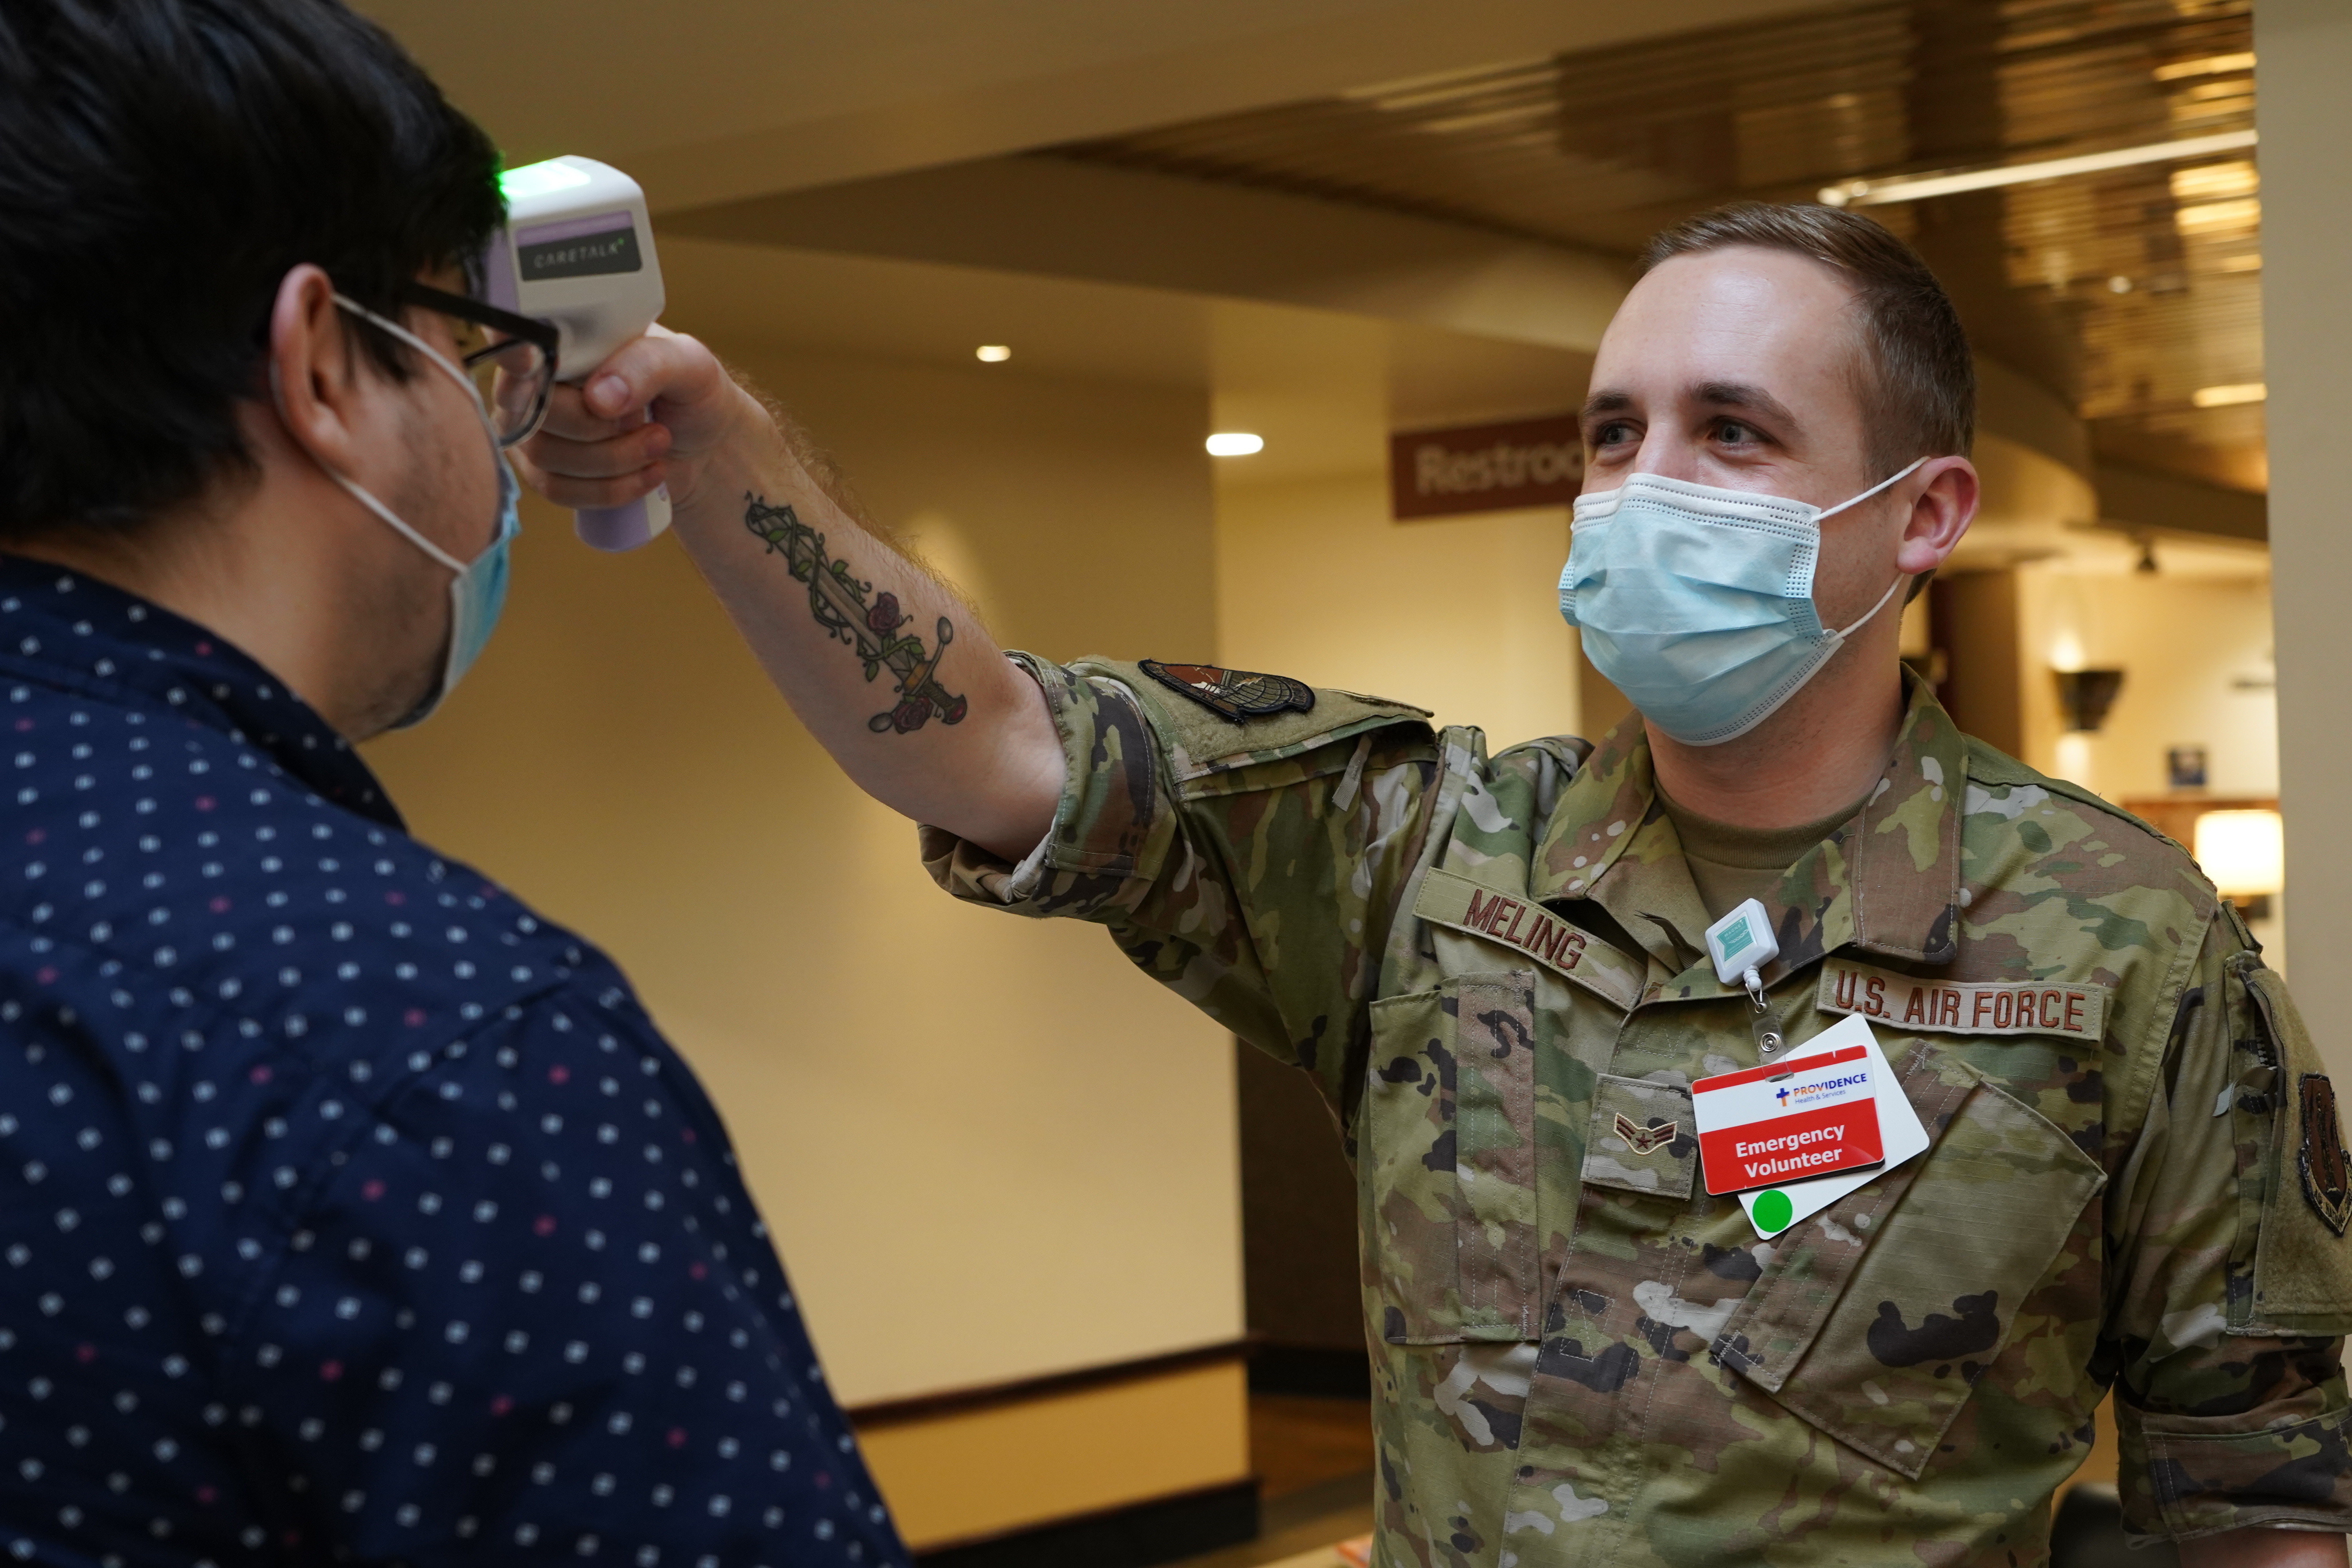 With 15K deployed, National Guard can now aid hospitals